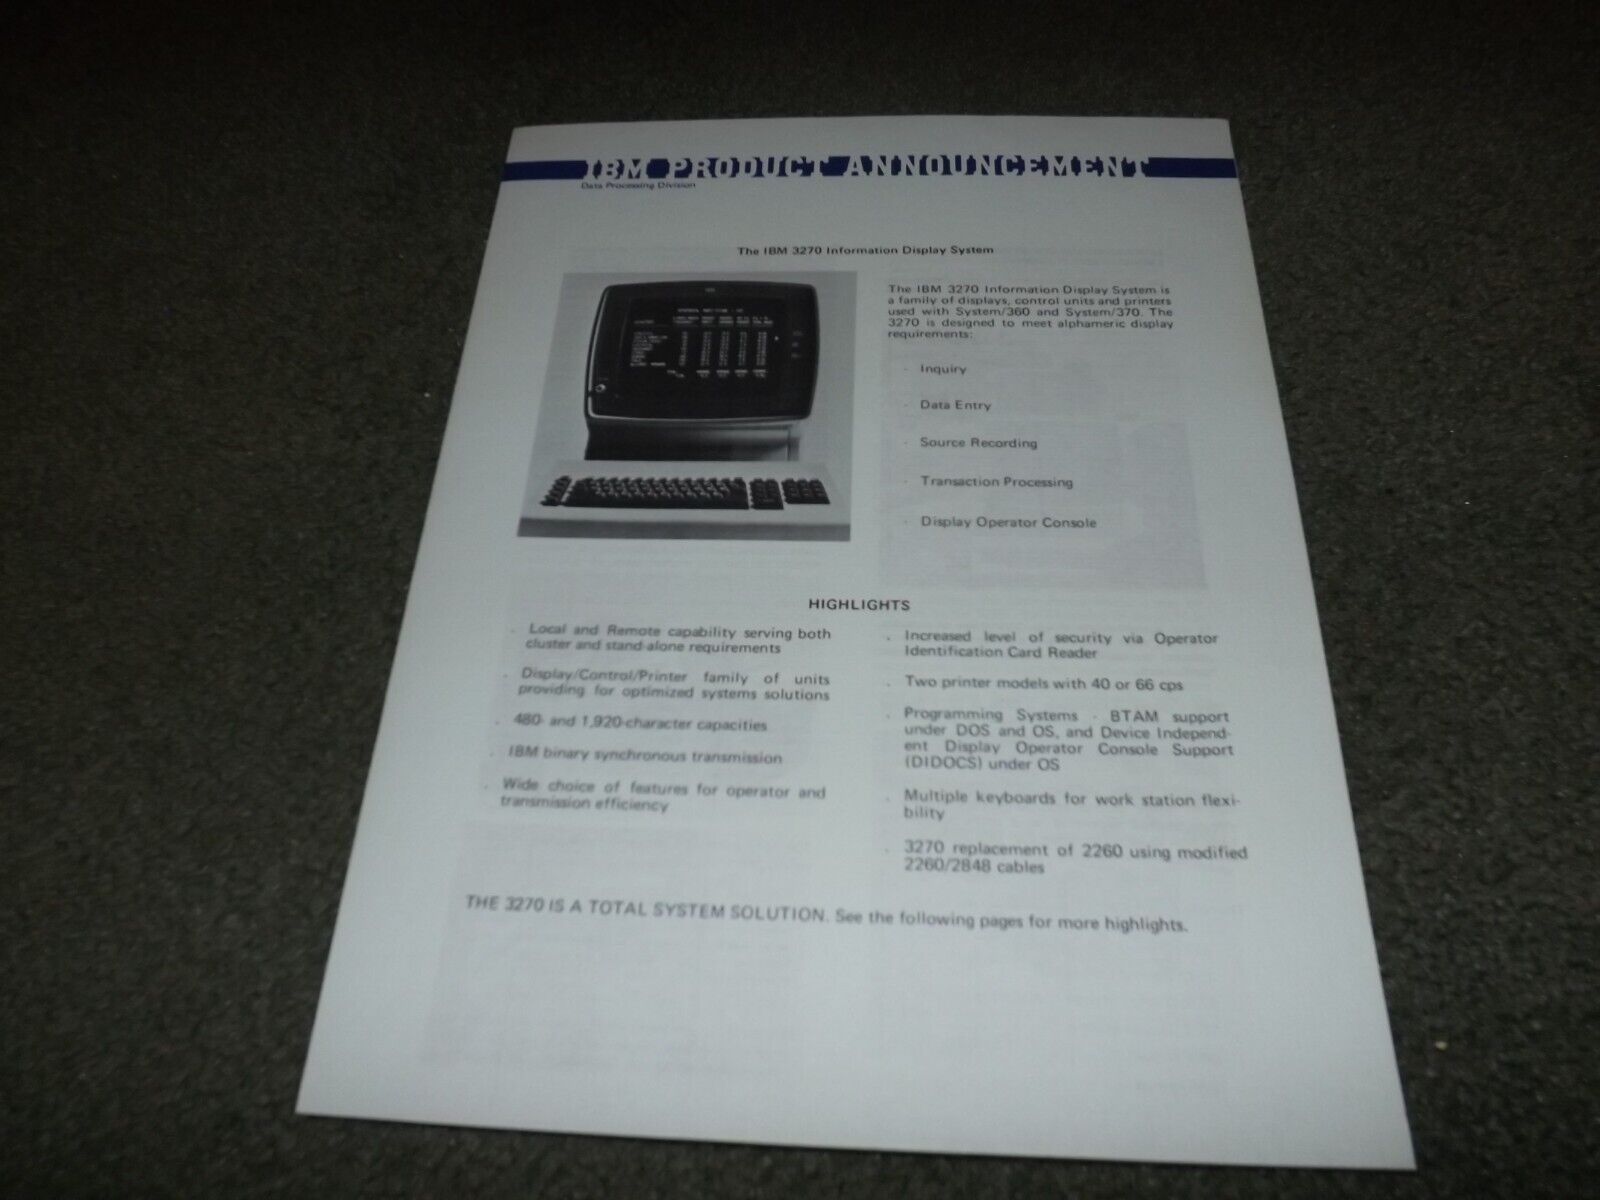 The IBM 3270 Information Display System - 4 Page Product Announcement - May 1971